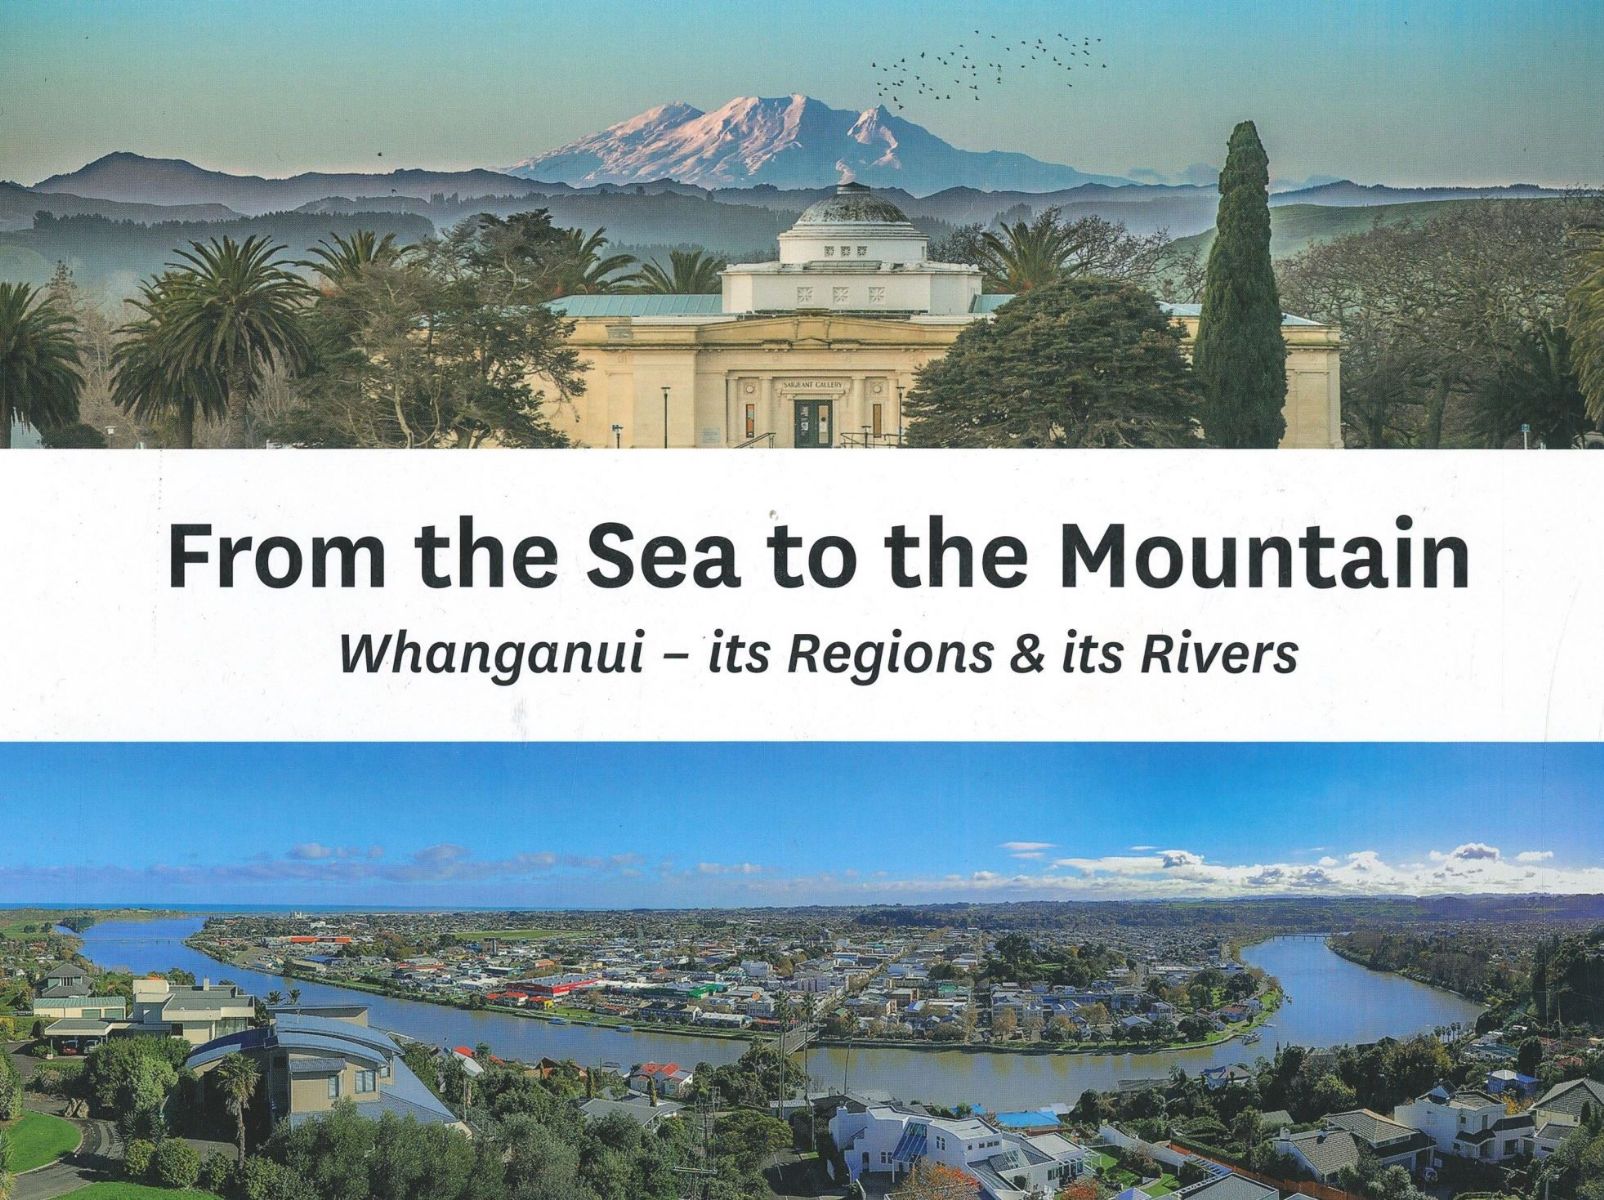 From the Sea to the Mountain: Whanganui - Its Regions & Its Rivers